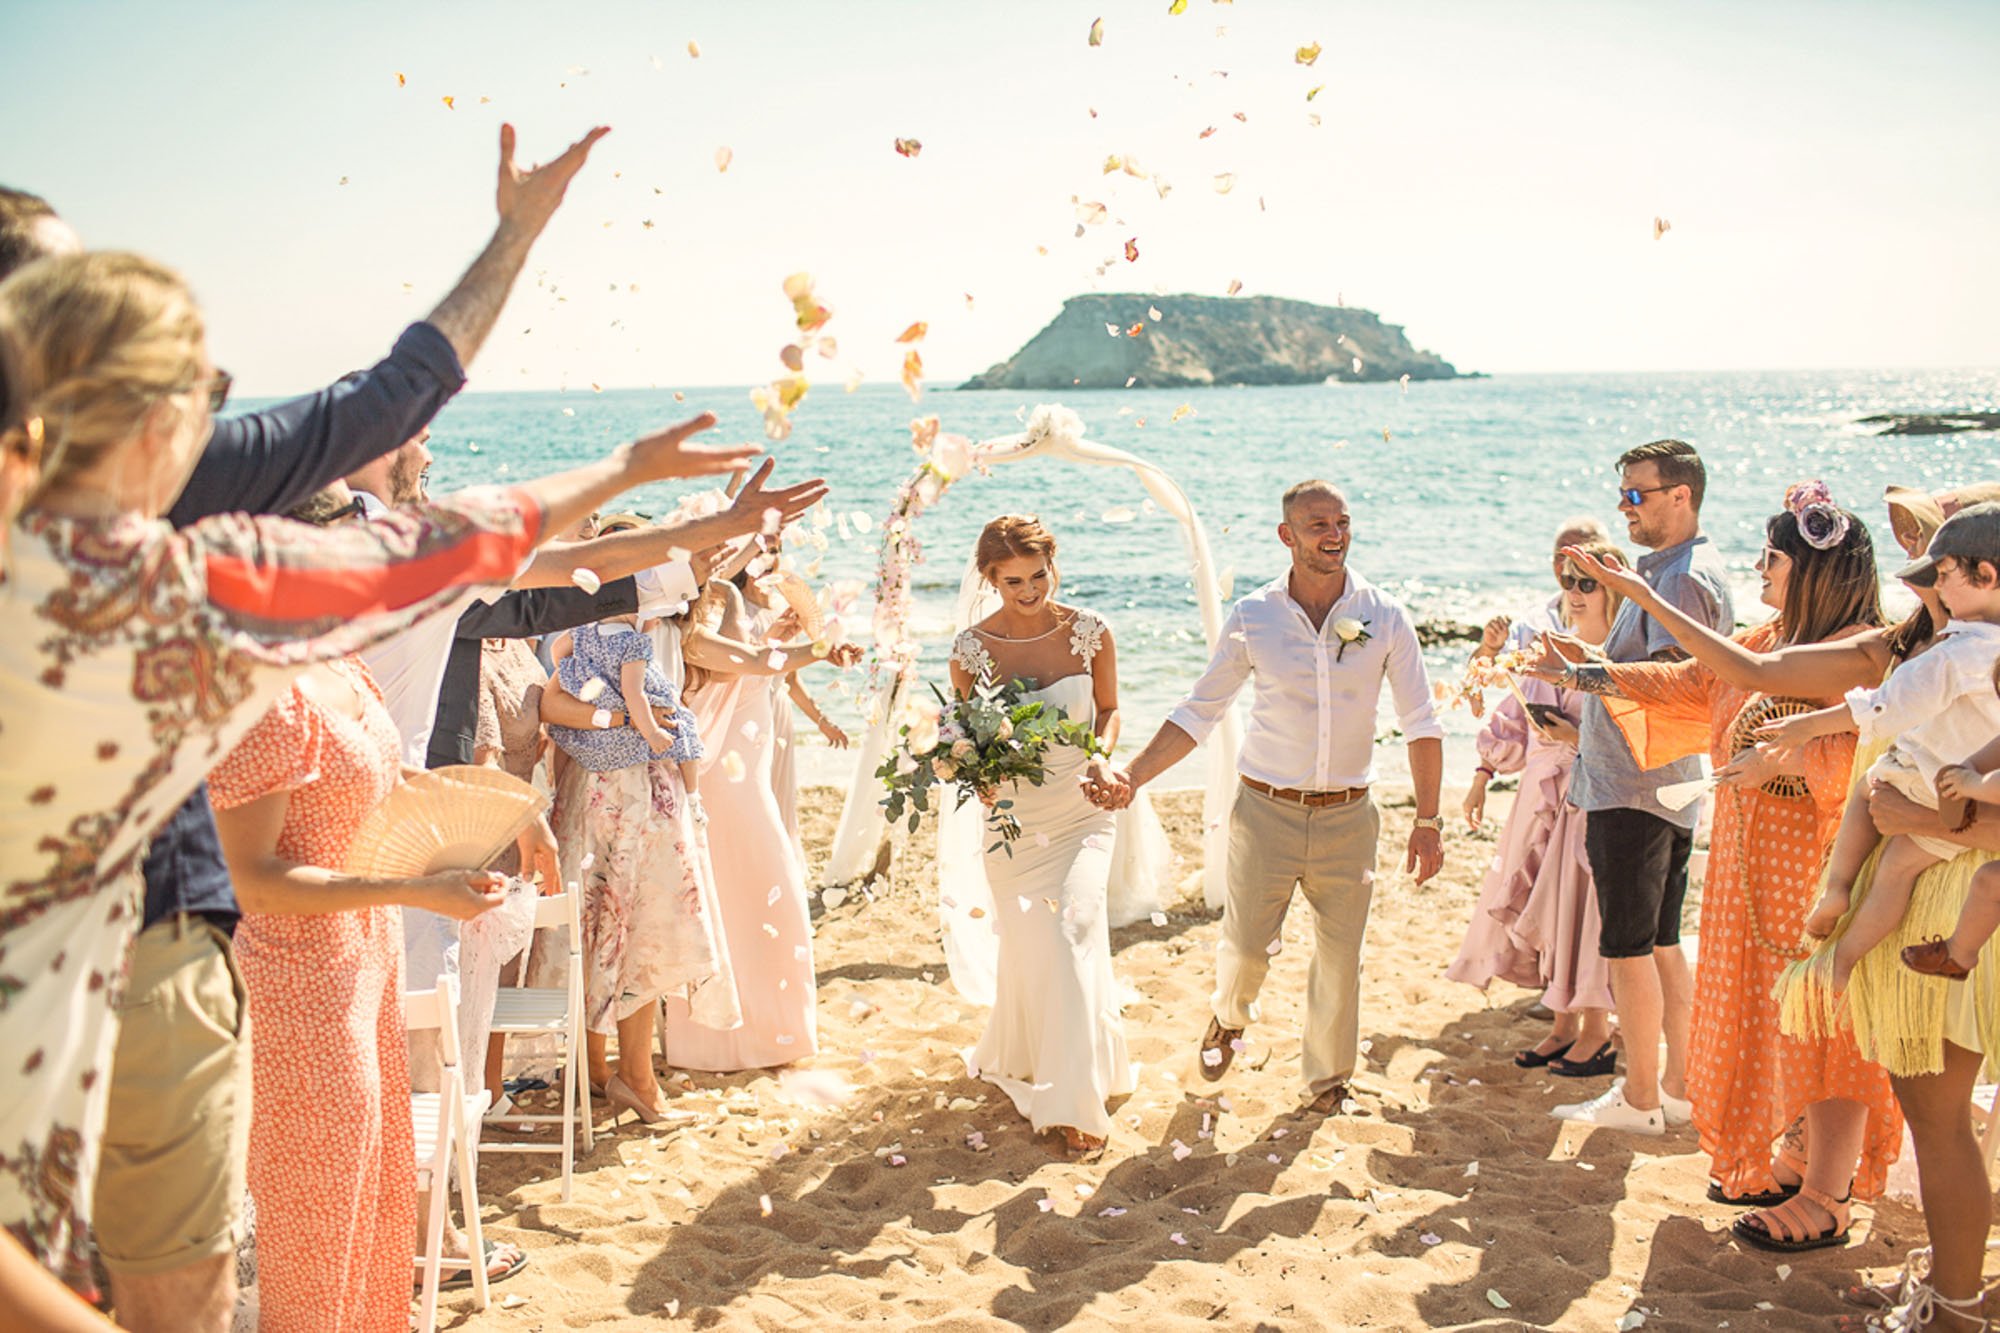 confetti shot Wedding photography at St George's Beach, Peyia, Paphos, Cyprus.